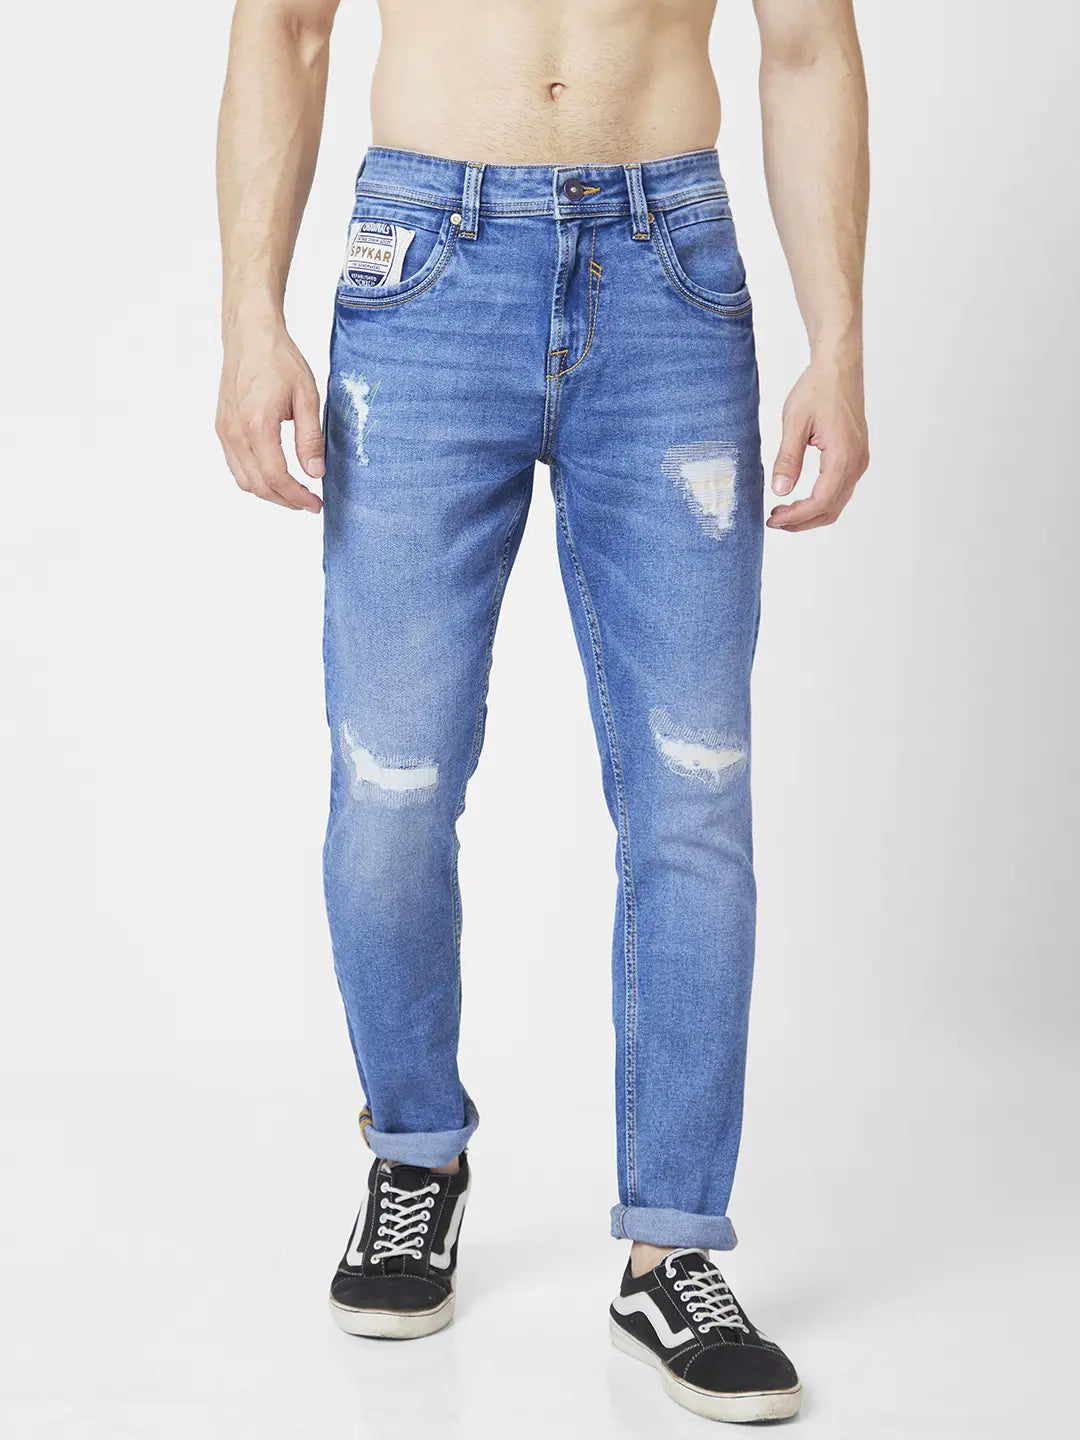 Buy SPYKAR Blue Light Wash Cotton Tapered Fit Men's Jeans | Shoppers Stop